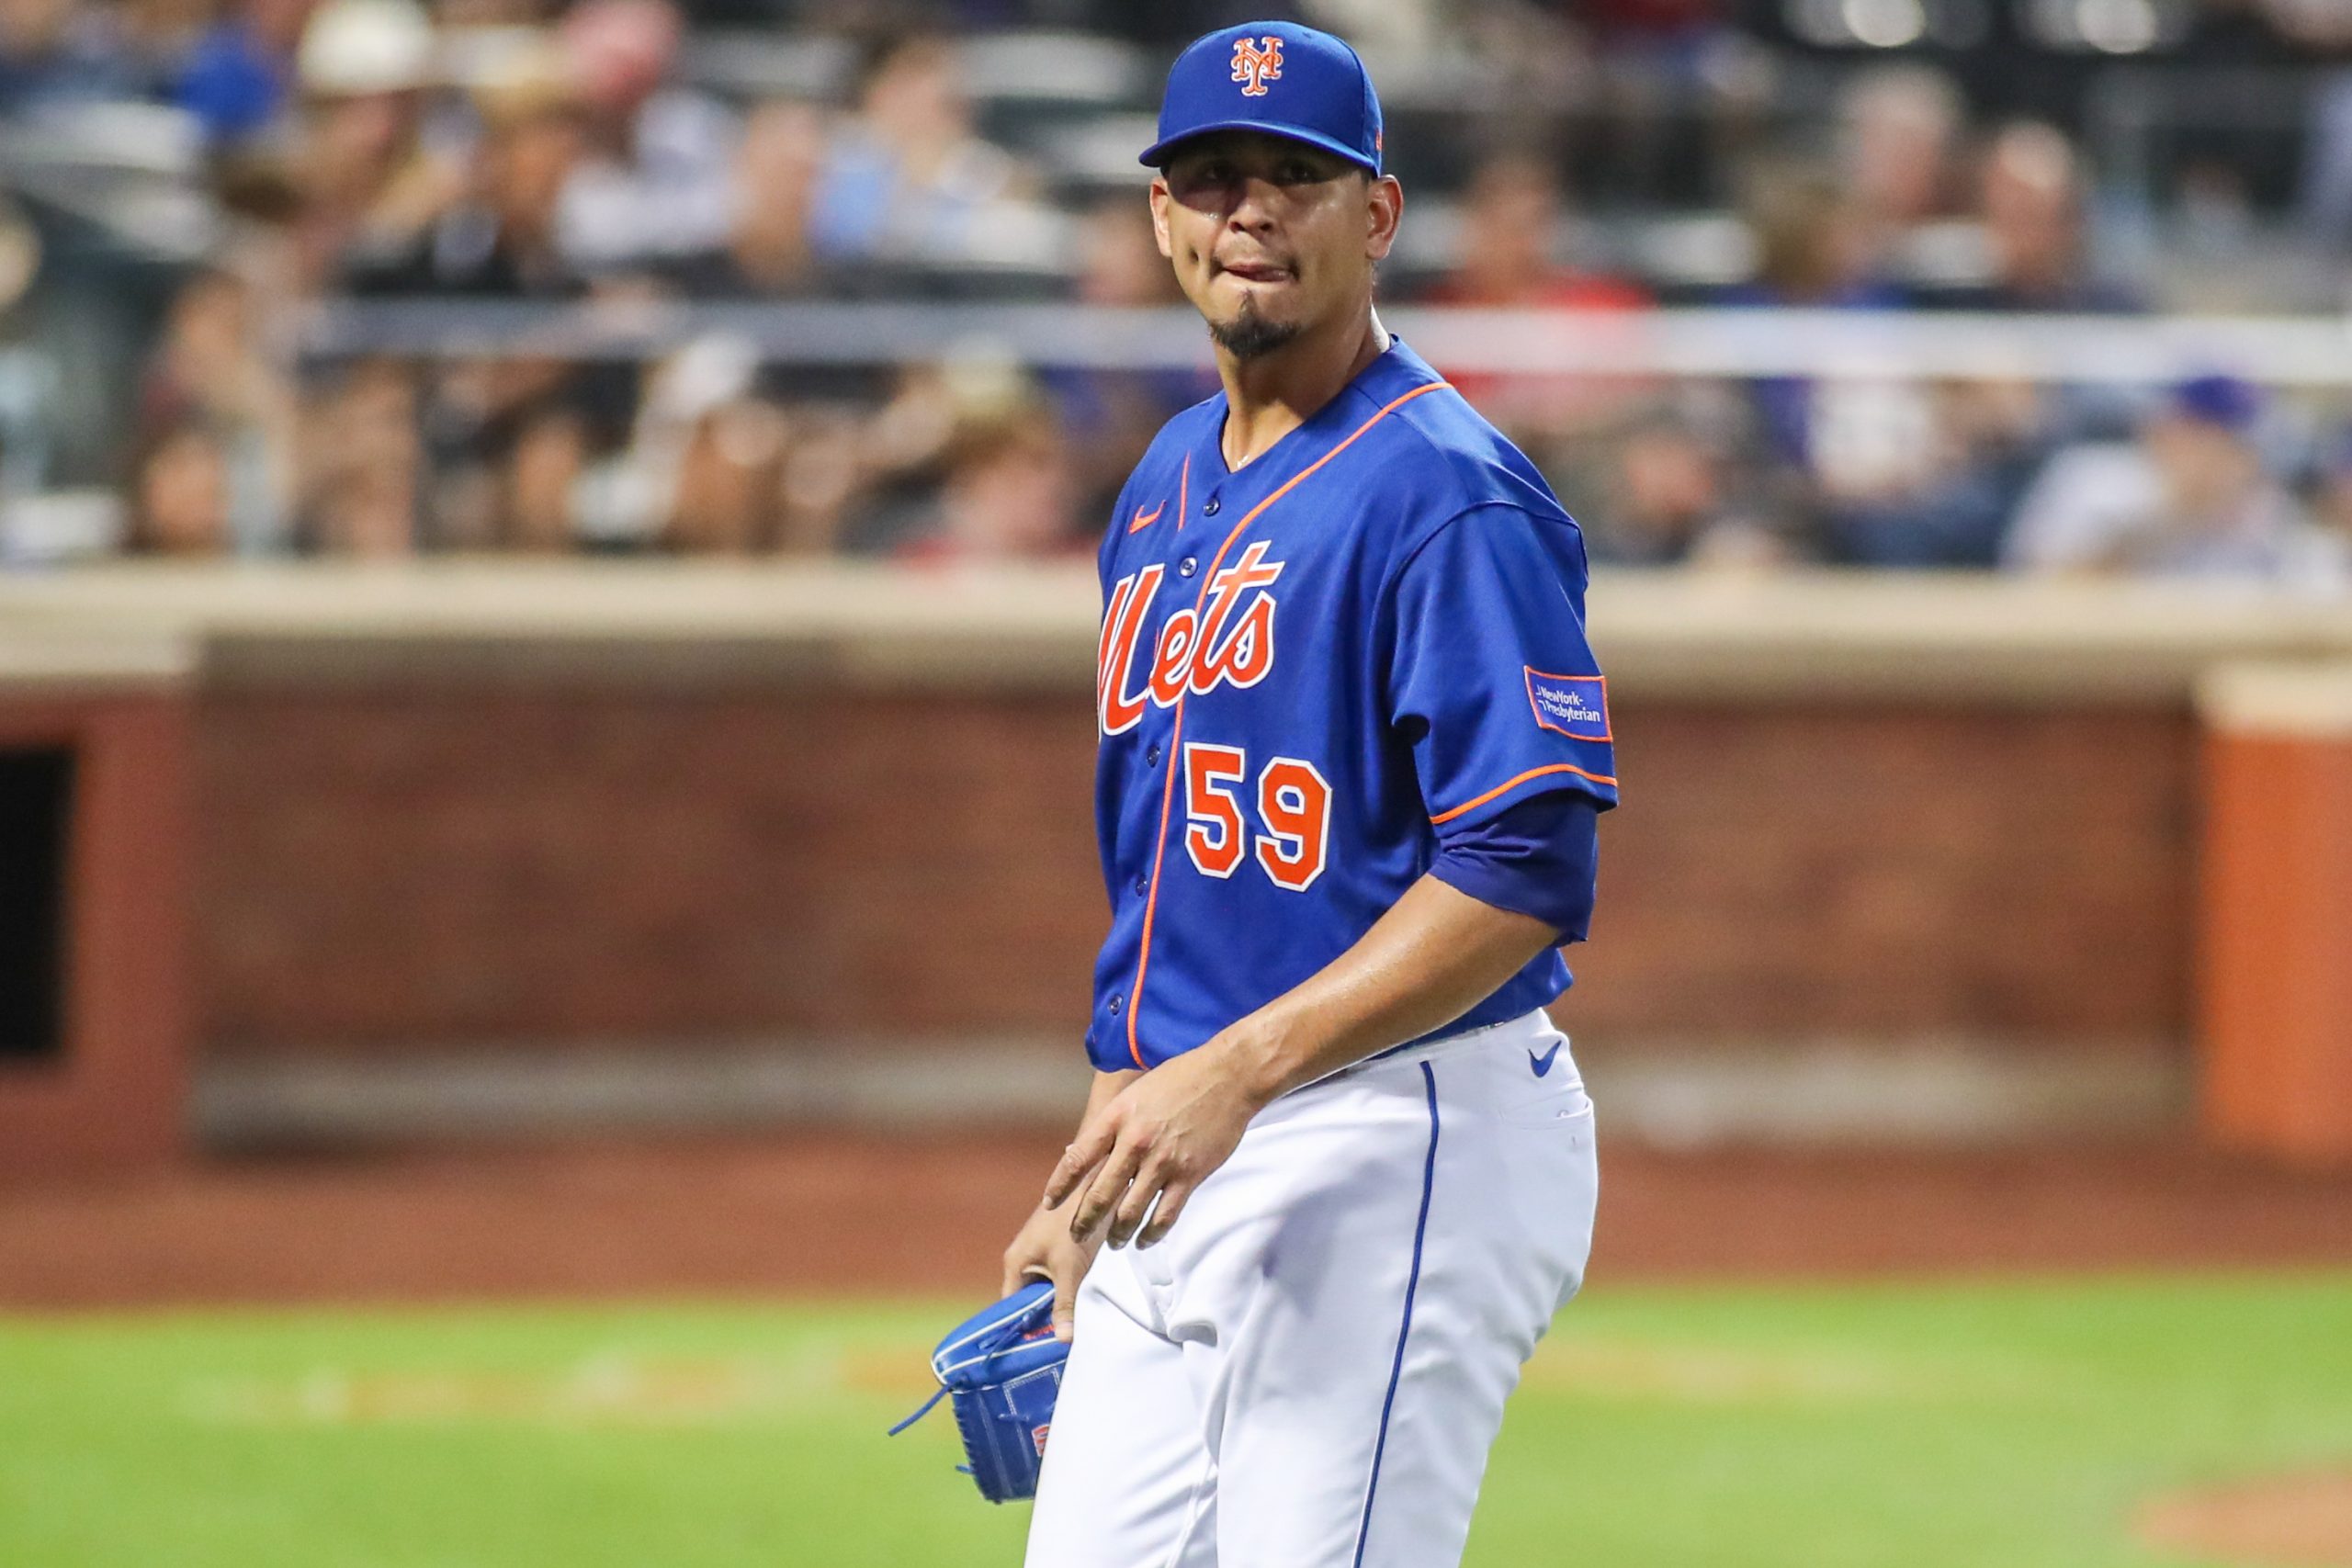 NY Mets: Mark Canha is an intriguing add this offseason